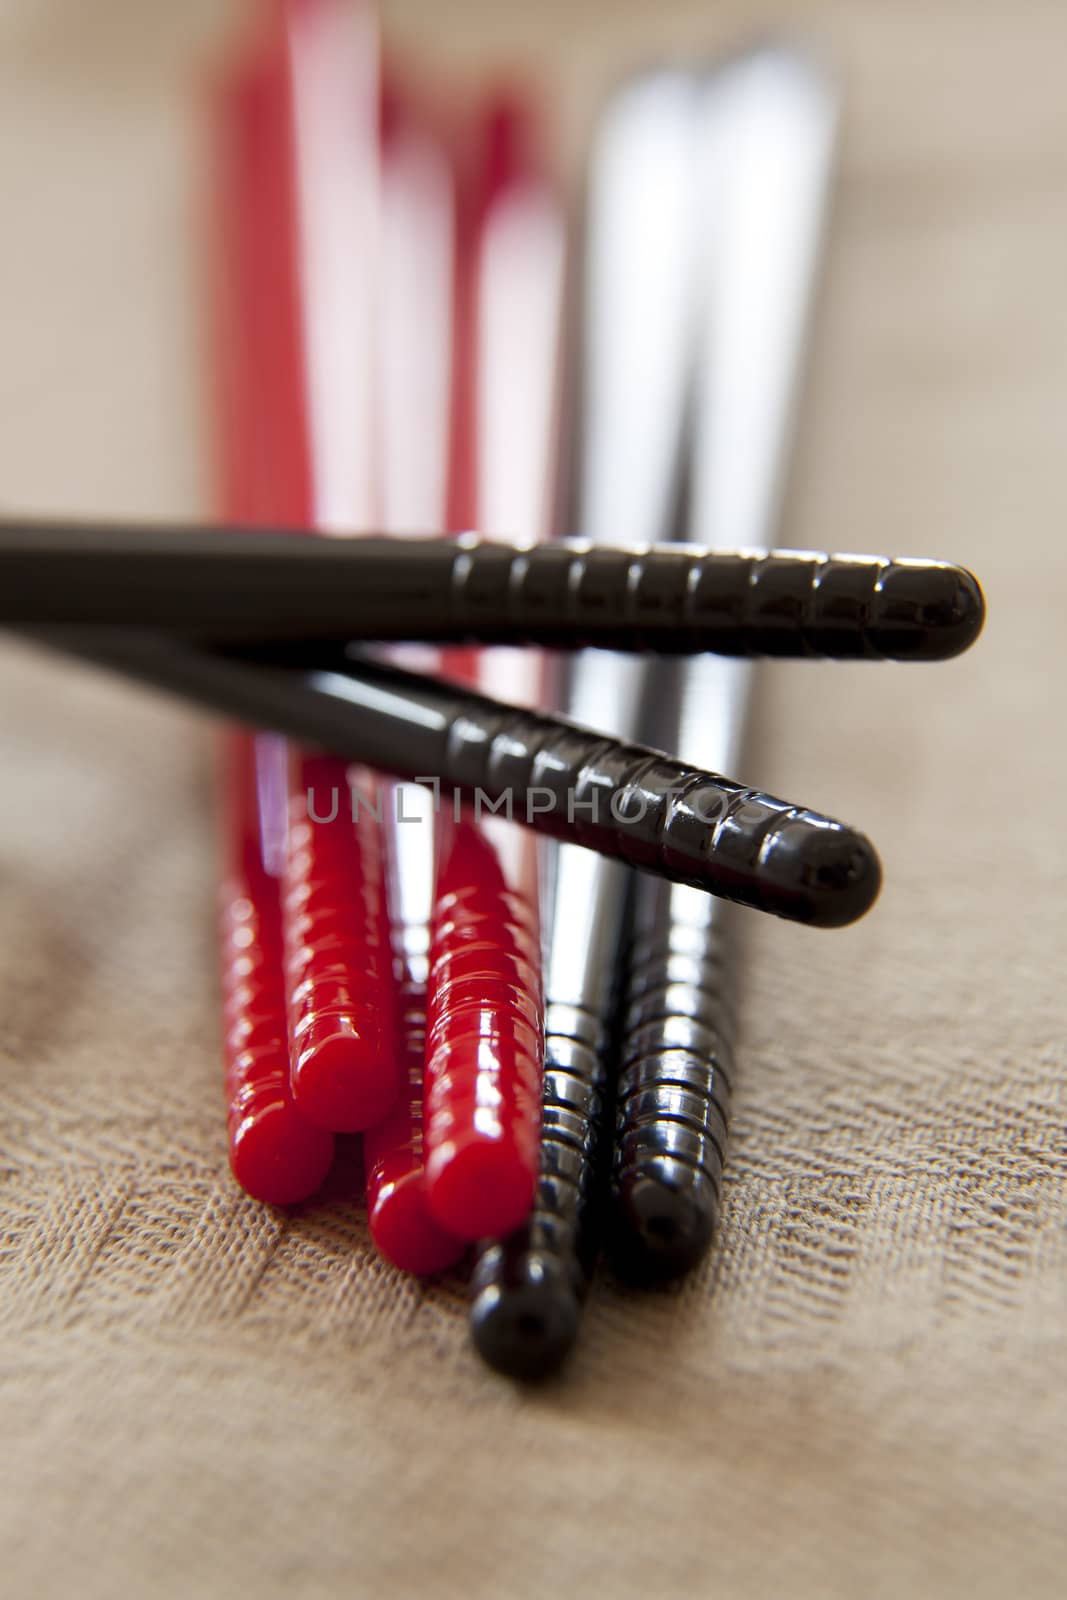 Four sets of plastic chopsticks in black and red.